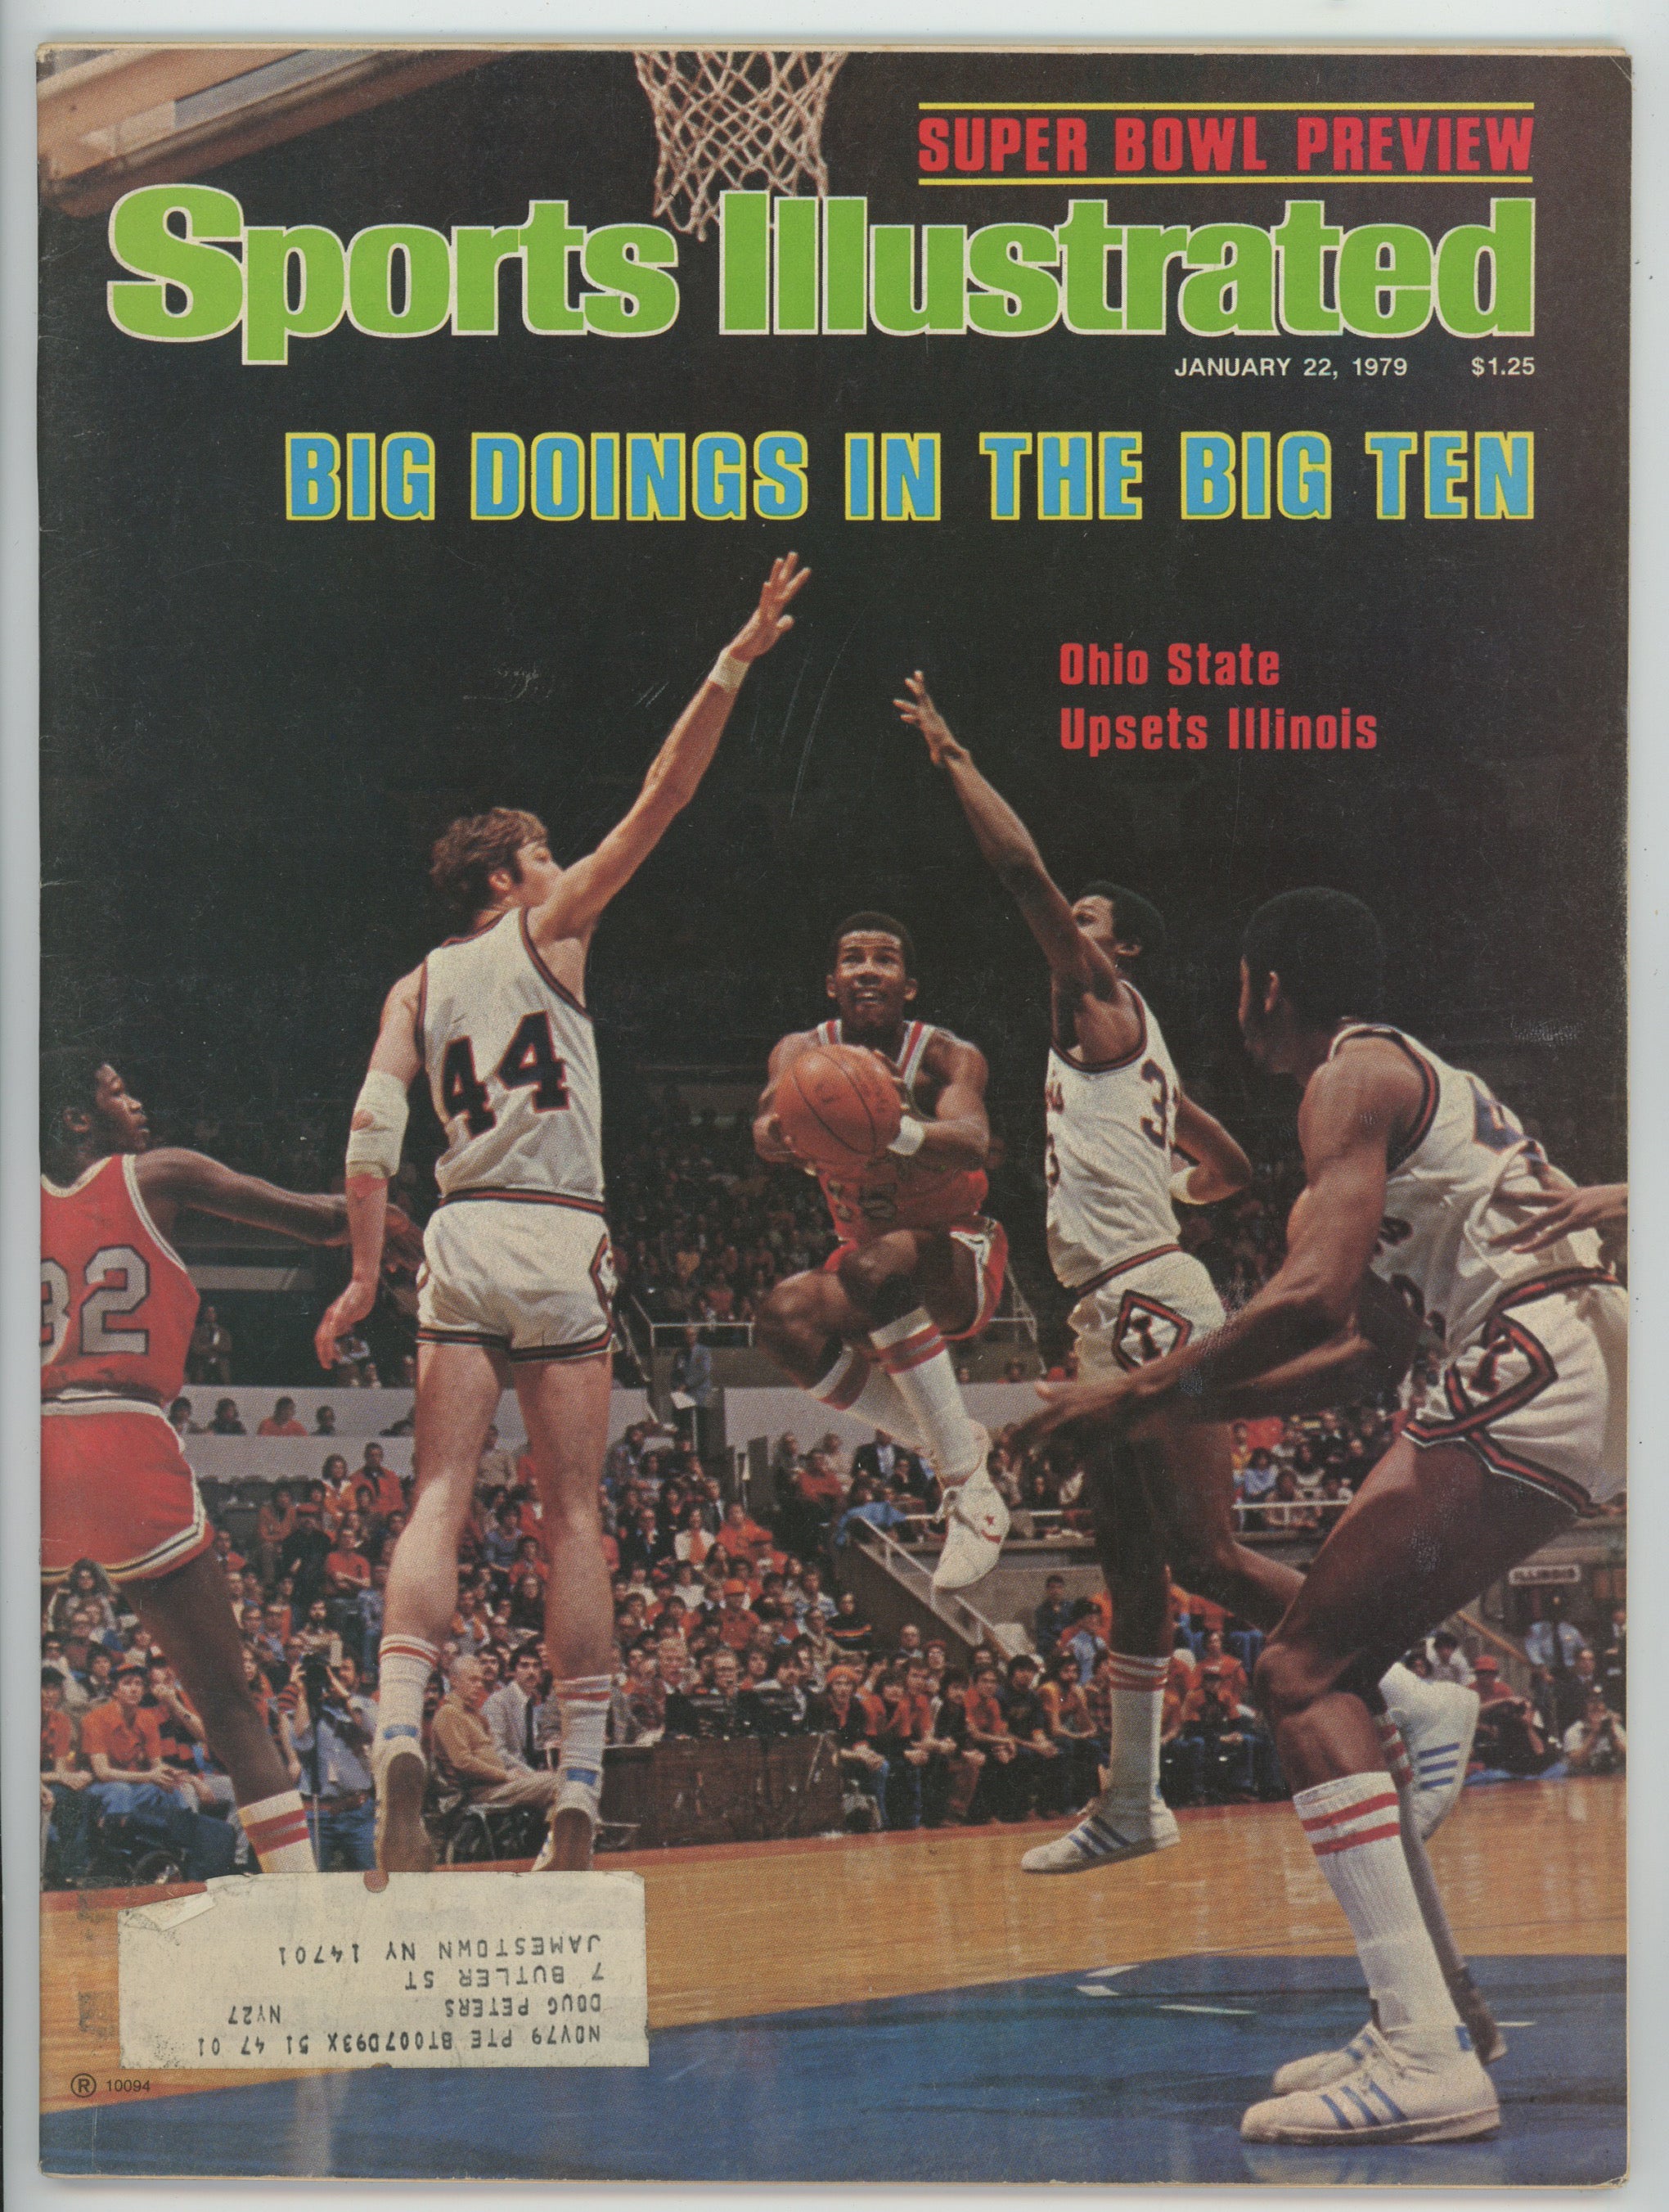 Ohio State Upsets Illinois "Big Doings in the Big Ten" 1/22/79 Sports Illustrated ML